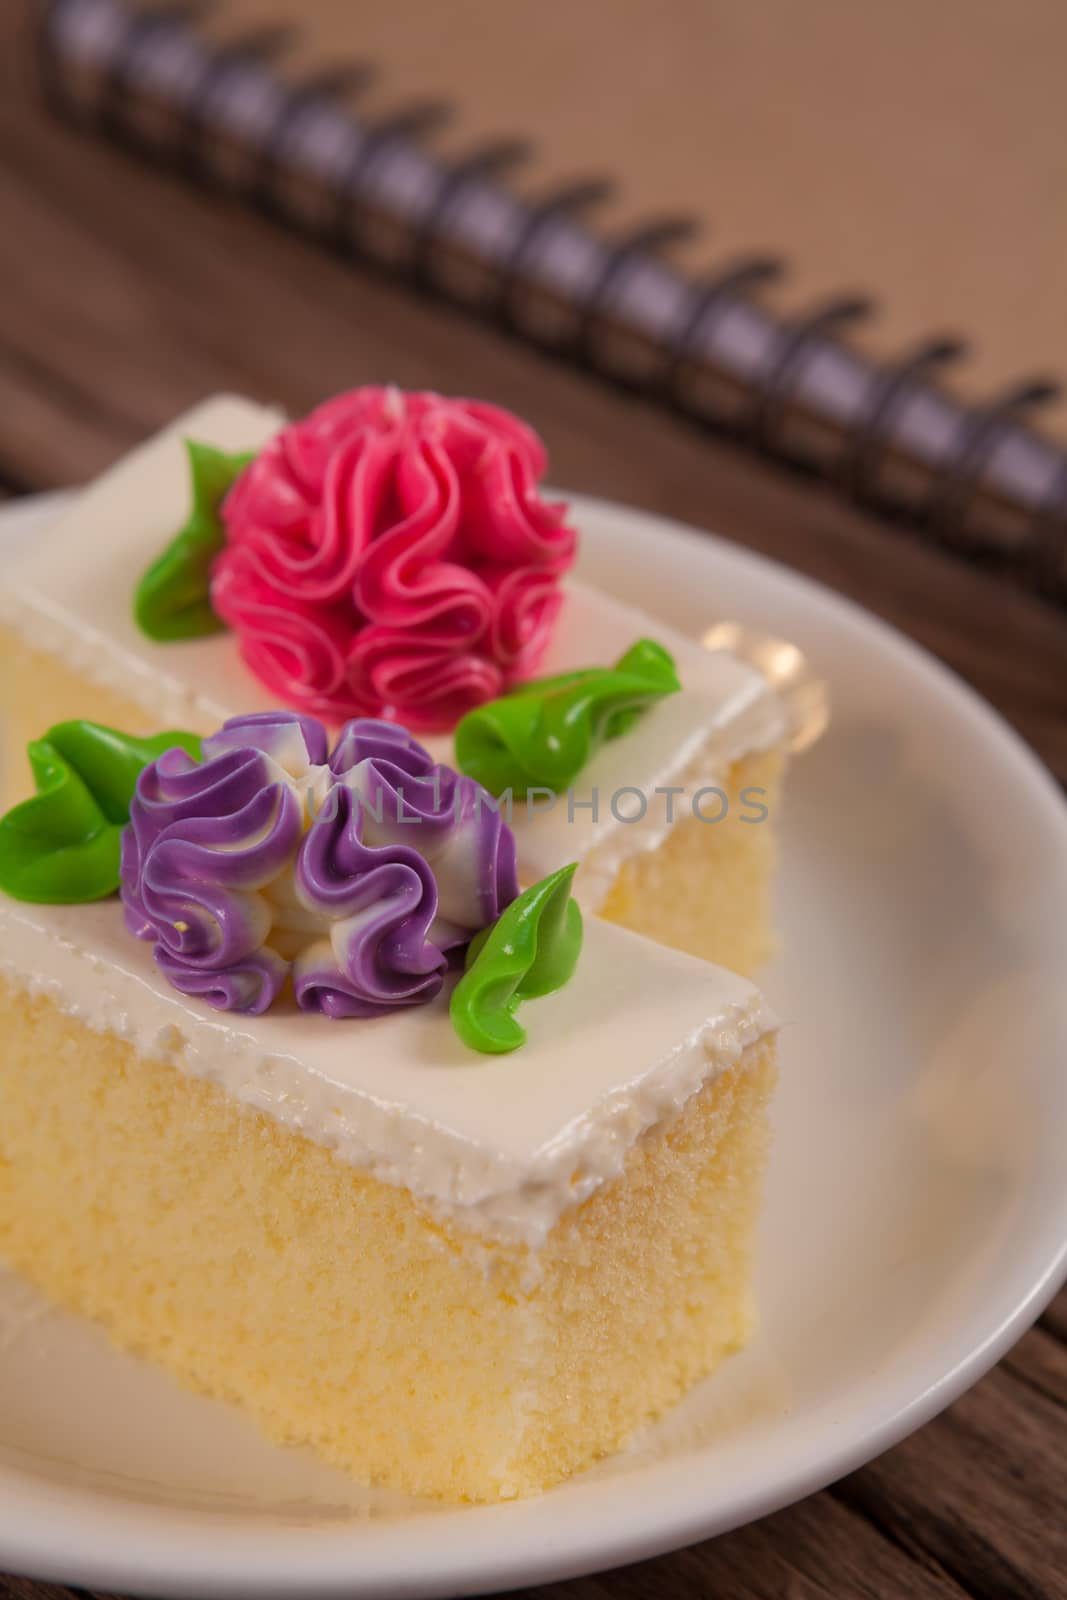 Flower Cake in white dish and notebook on the wood table